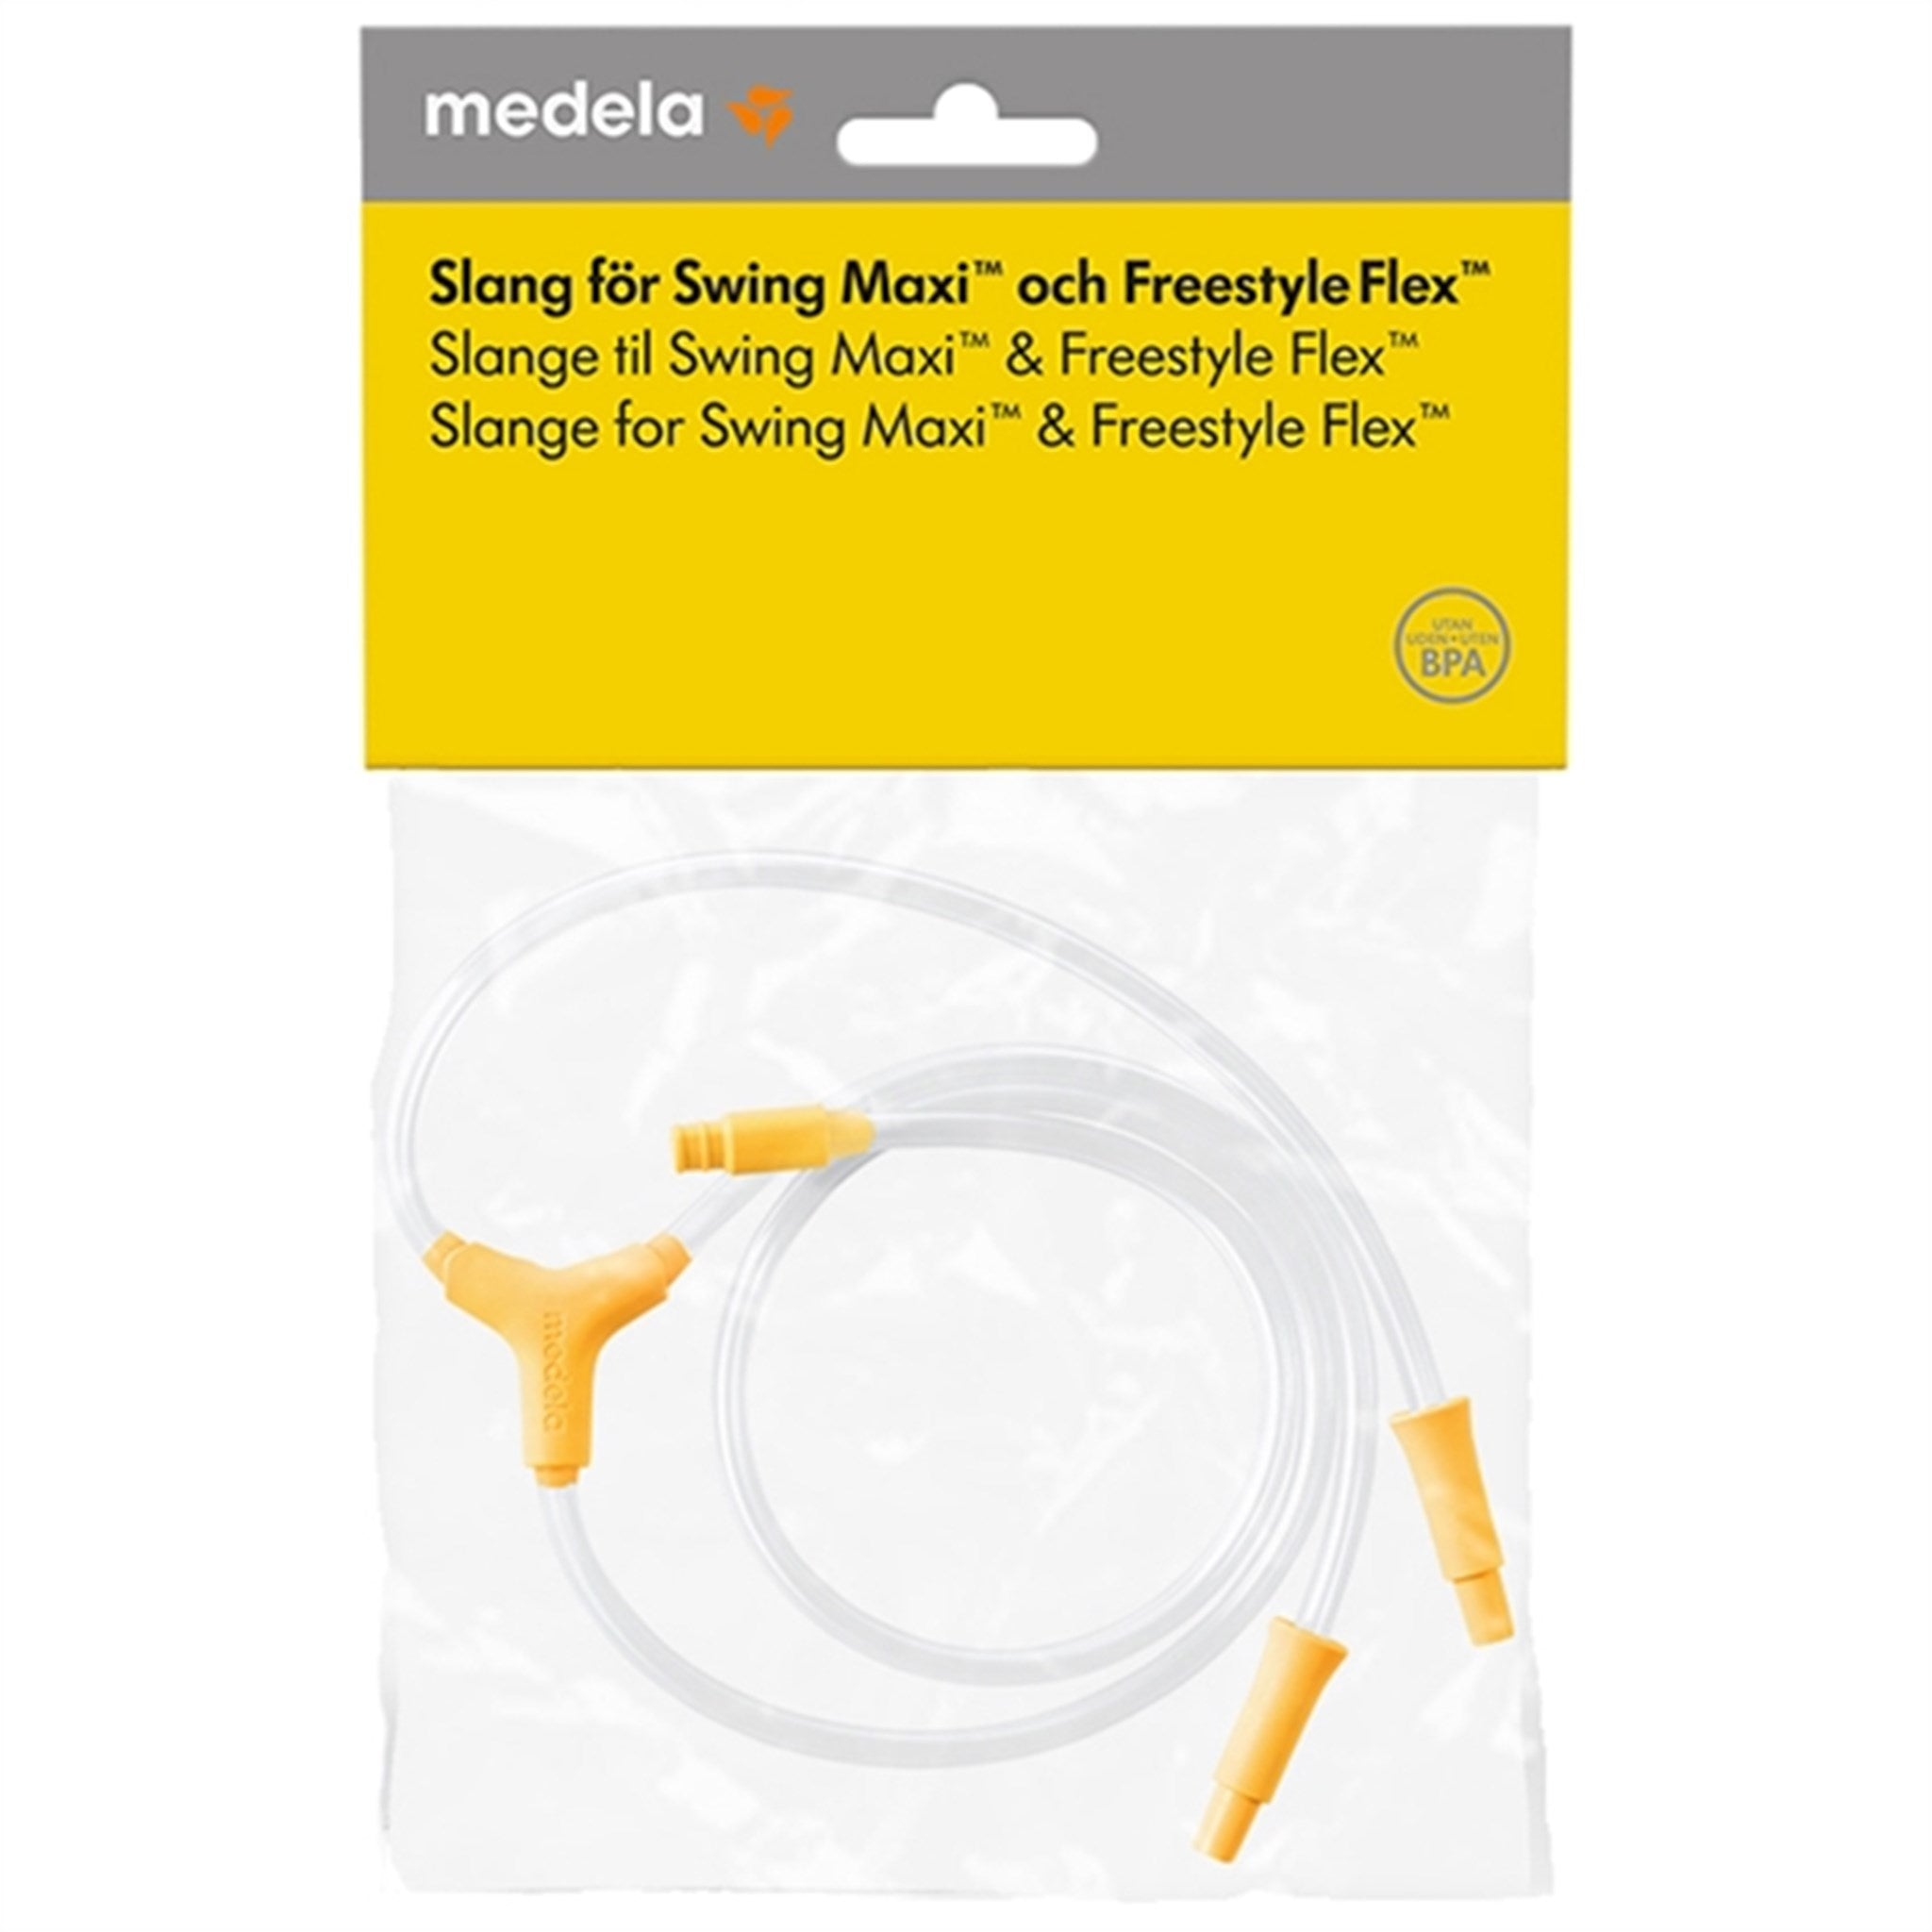 medela Hose for Swing Maxi And Freestyle Flex Breast Pump 2